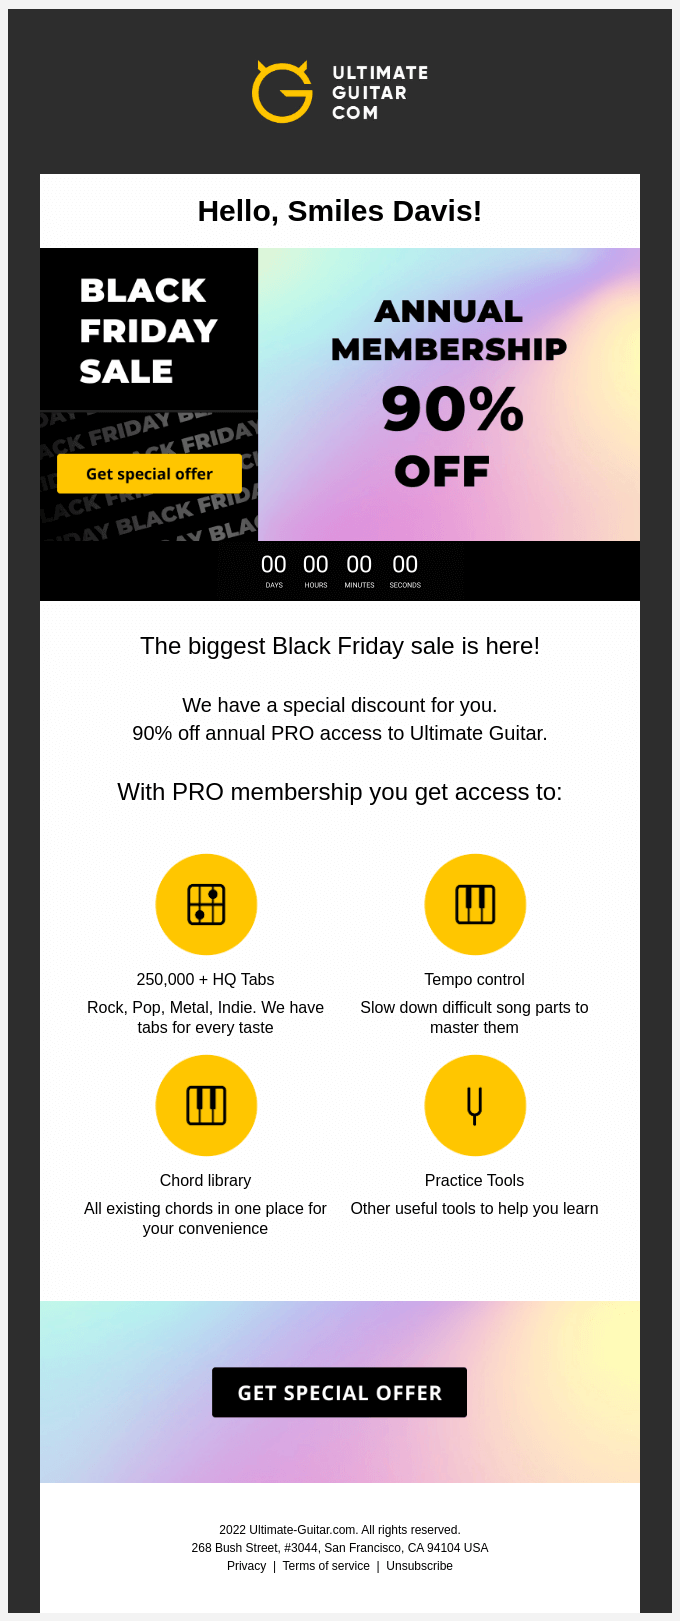 ⚡Black Friday sale is here – act now!